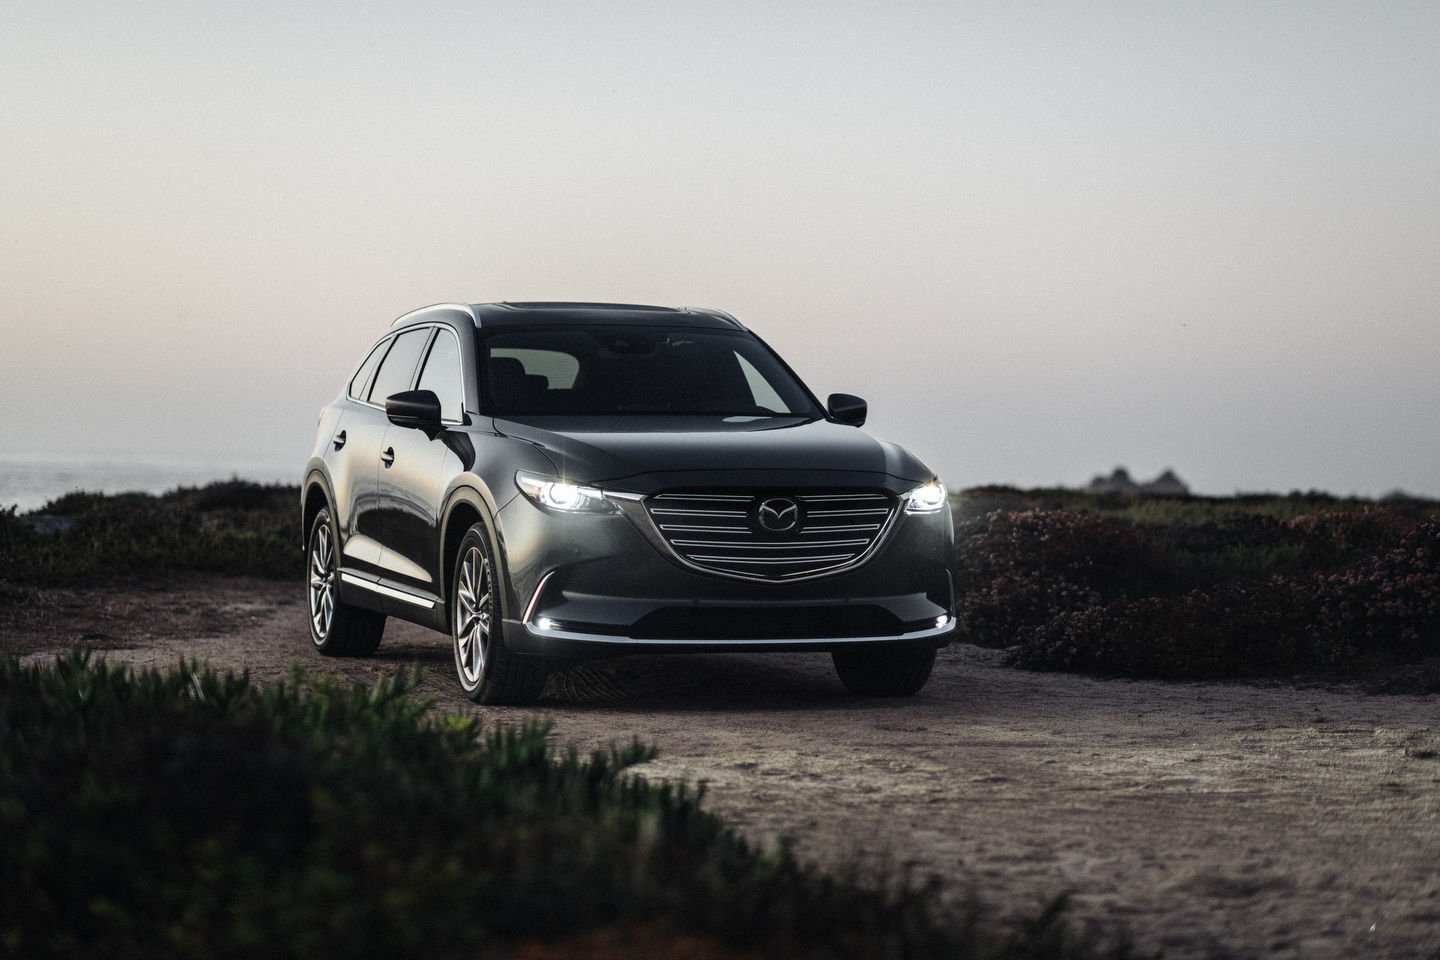 The Advantages of Buying a Pre-Owned Mazda CX-9 Over a Honda Pilot